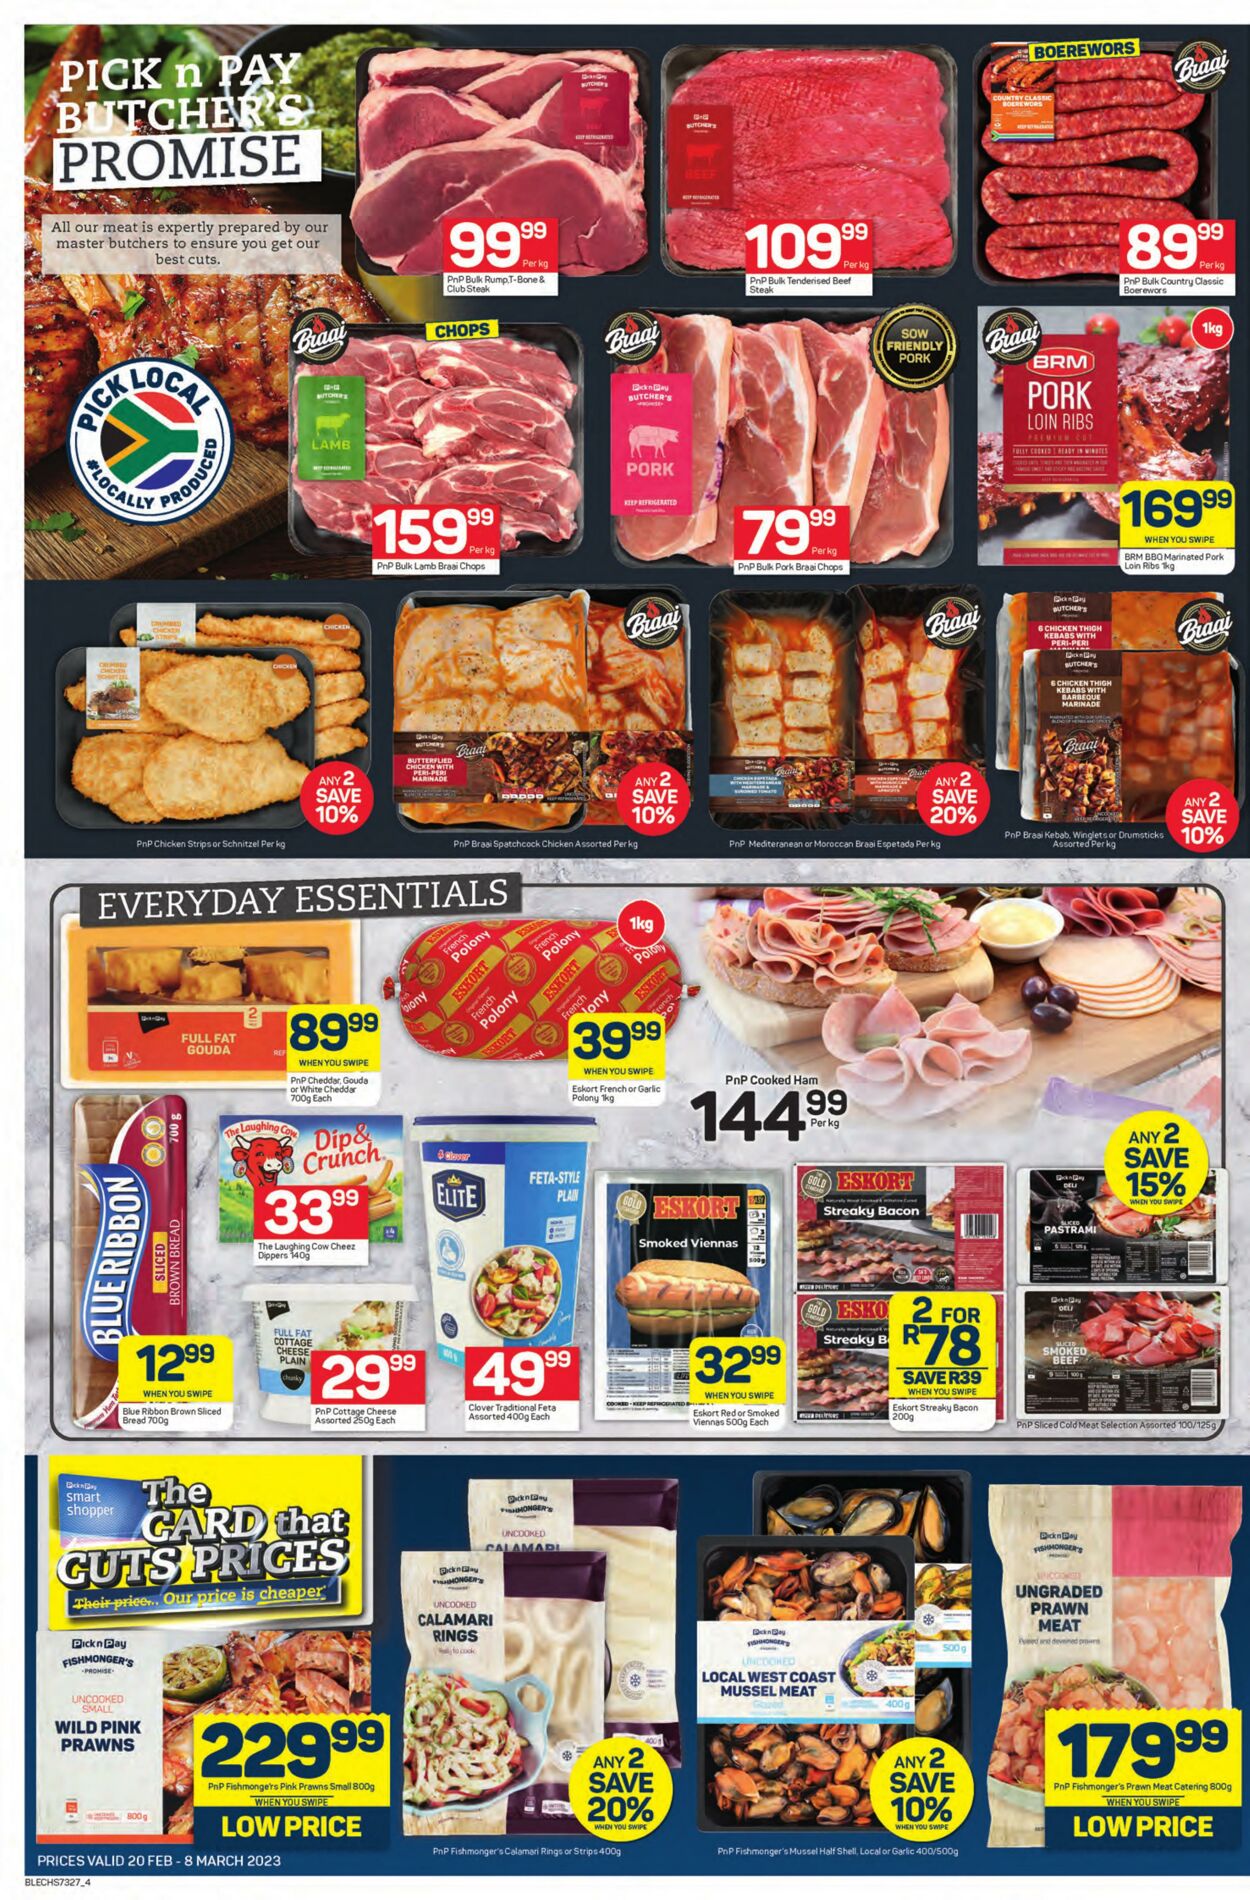 Special Pick n Pay 20.02.2023 - 08.03.2023